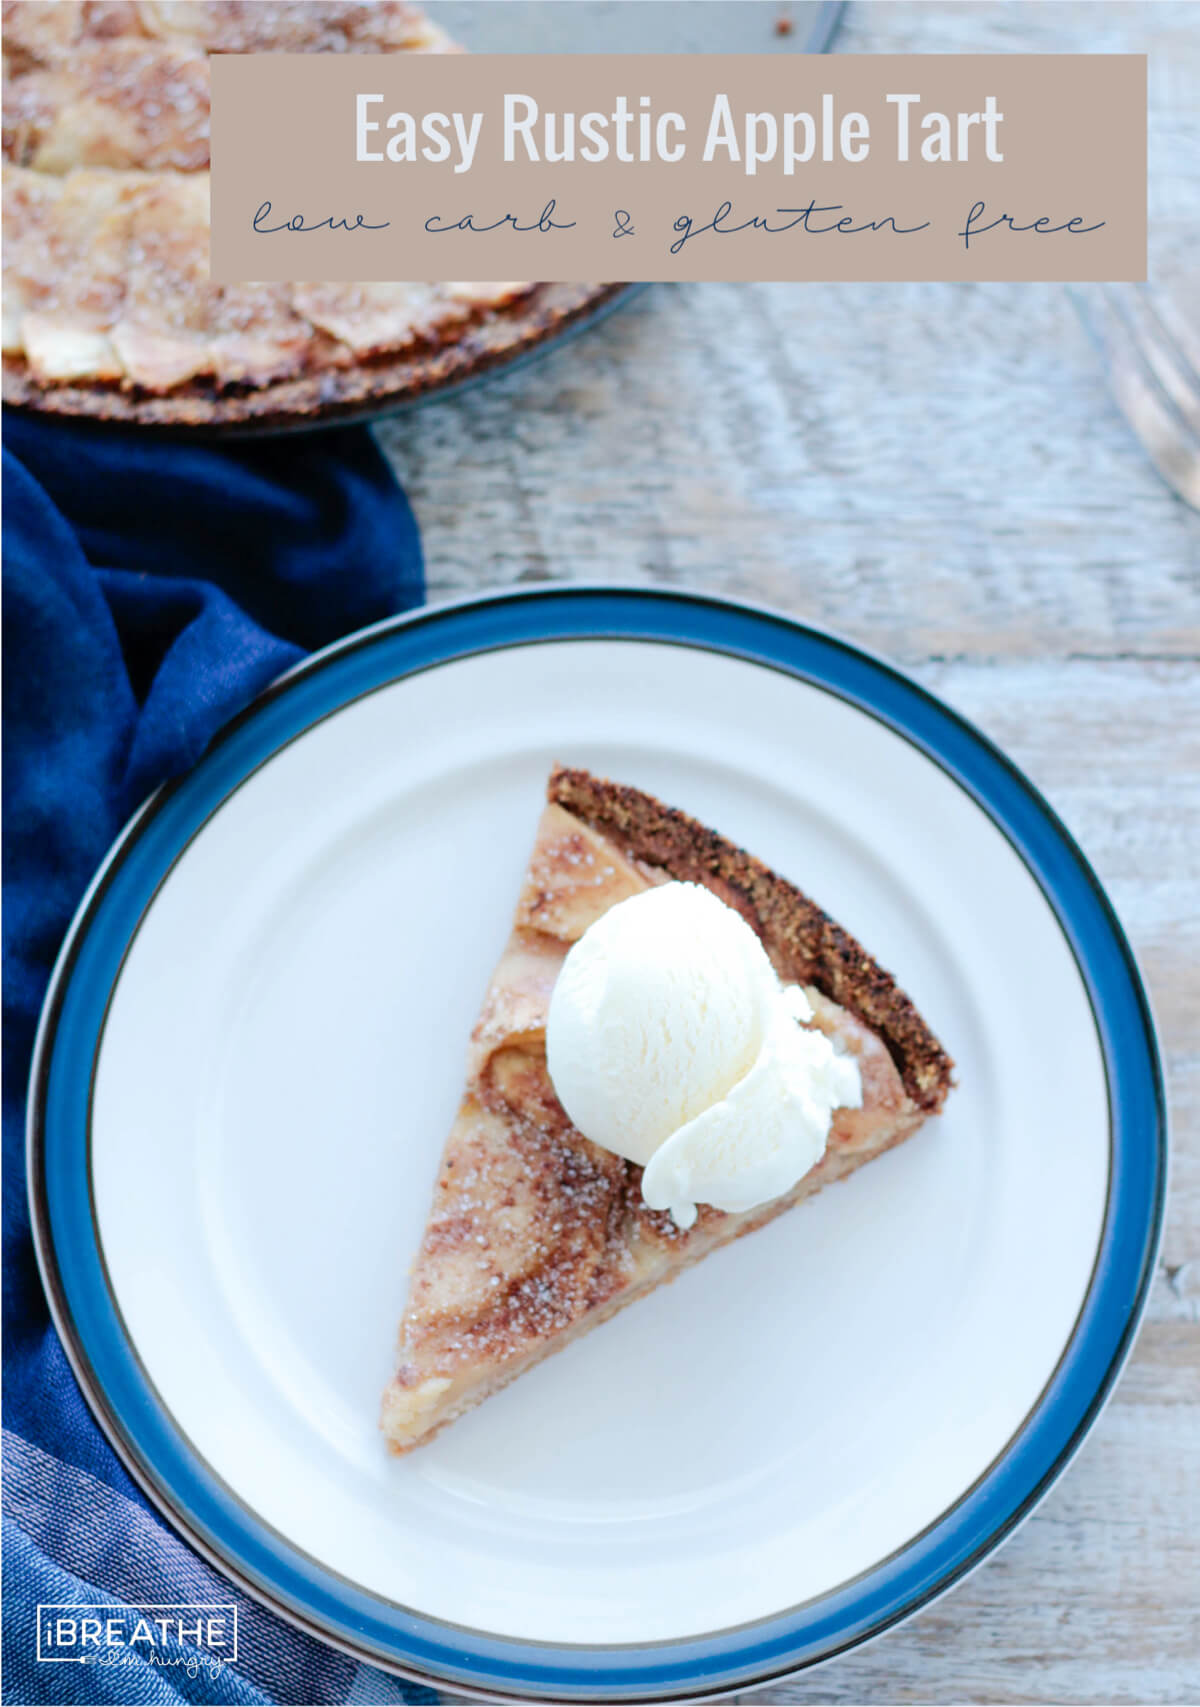 This easy rustic apple tart comes together in just minutes and will be a hit with the whole family! Low Carb and gluten free too!